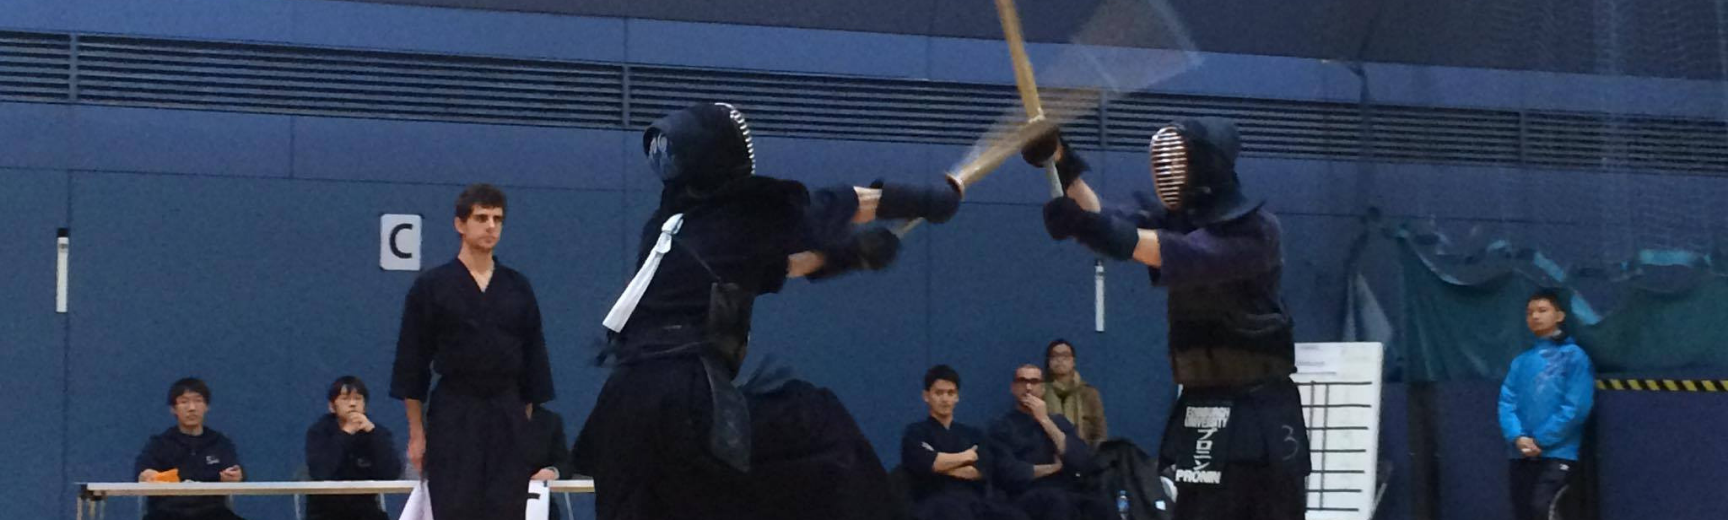 Two people in a kendo duel with a crowd watching behind them